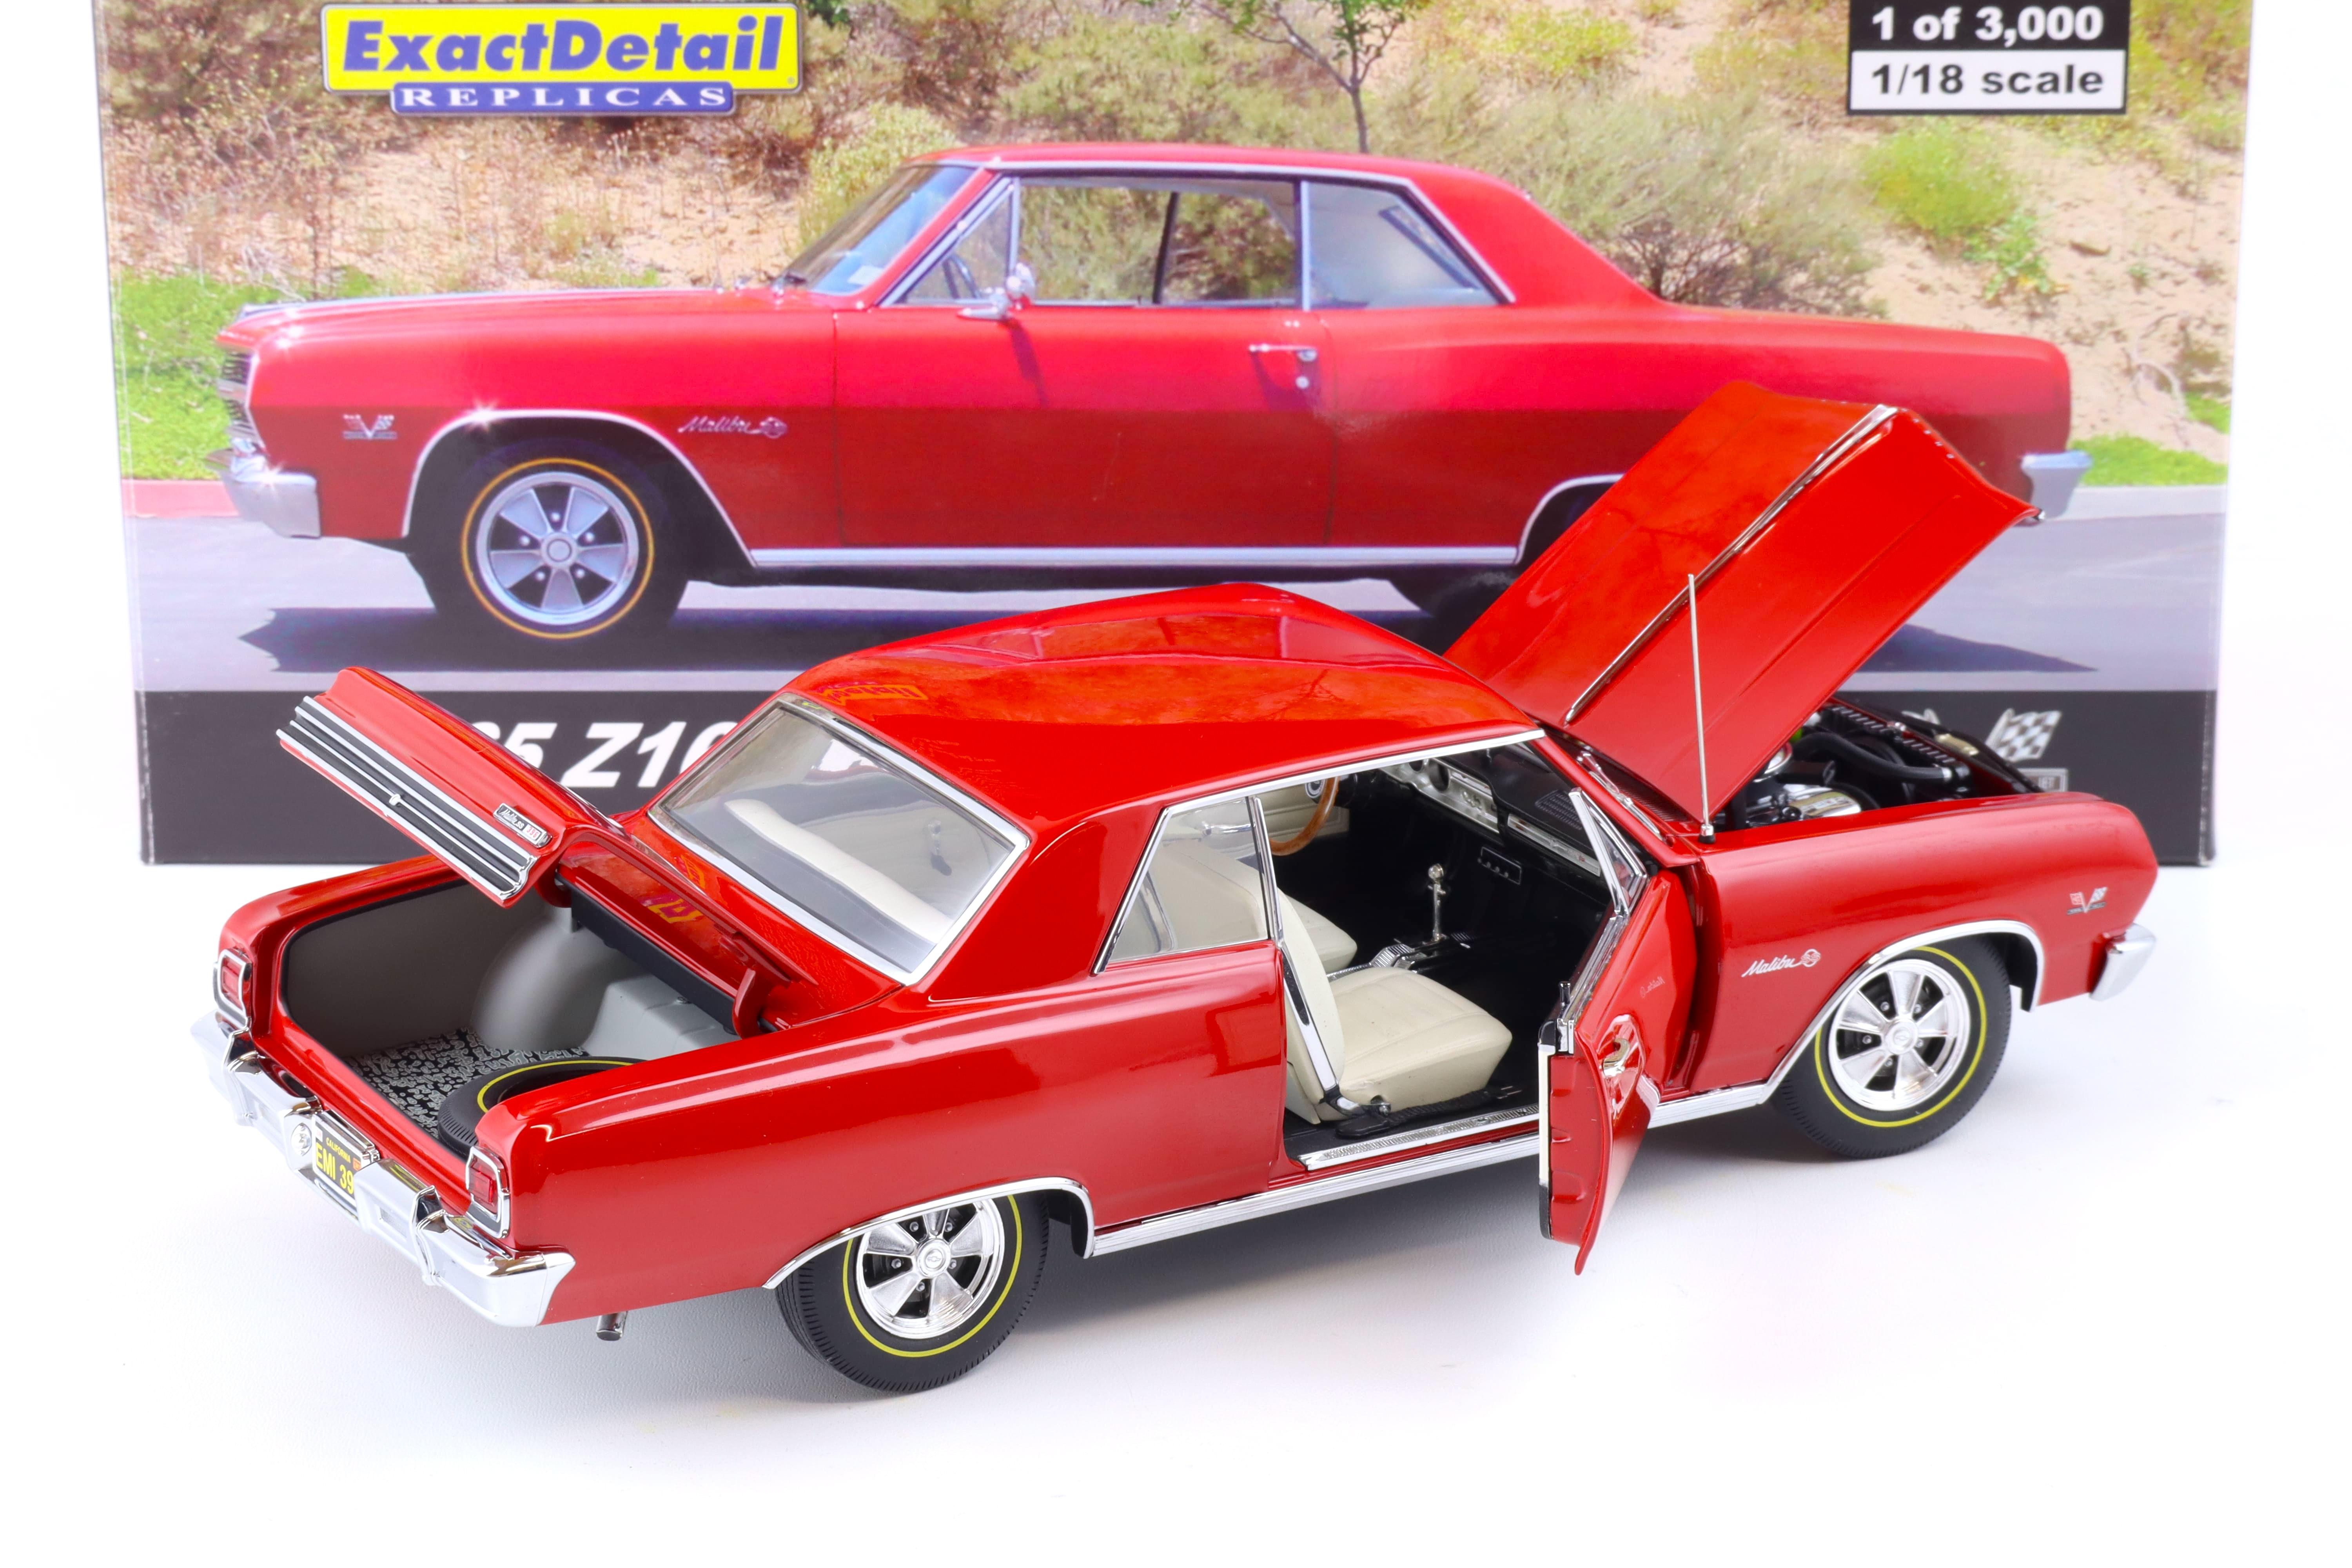 1:18 Exact Detail Chevrolet Chevelle Z16 Malibu SS Coupe 1965 red WCC501